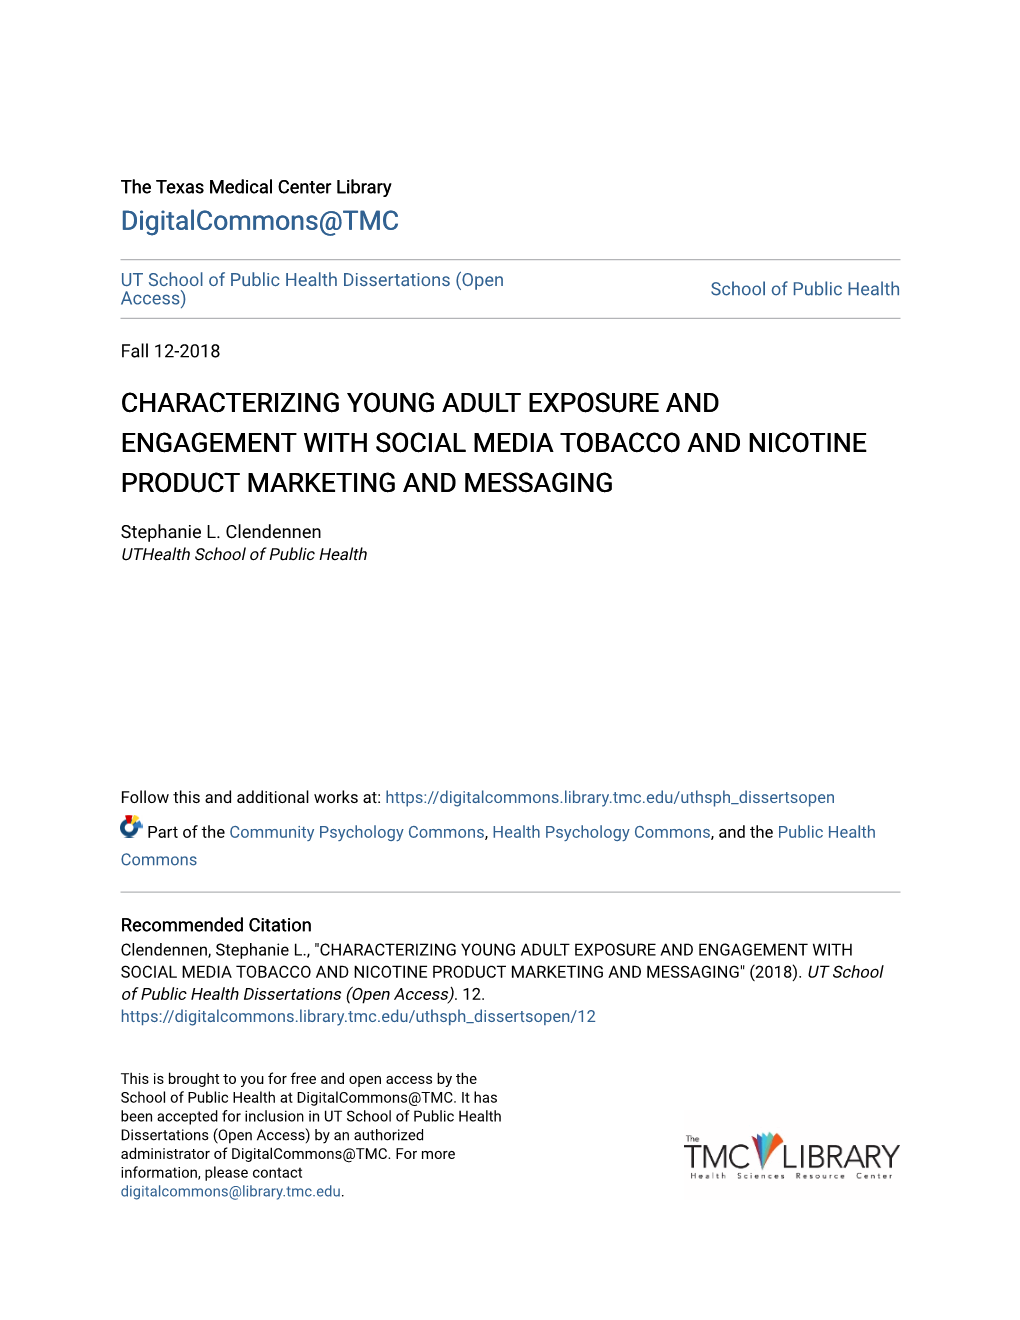 Characterizing Young Adult Exposure and Engagement with Social Media Tobacco and Nicotine Product Marketing and Messaging